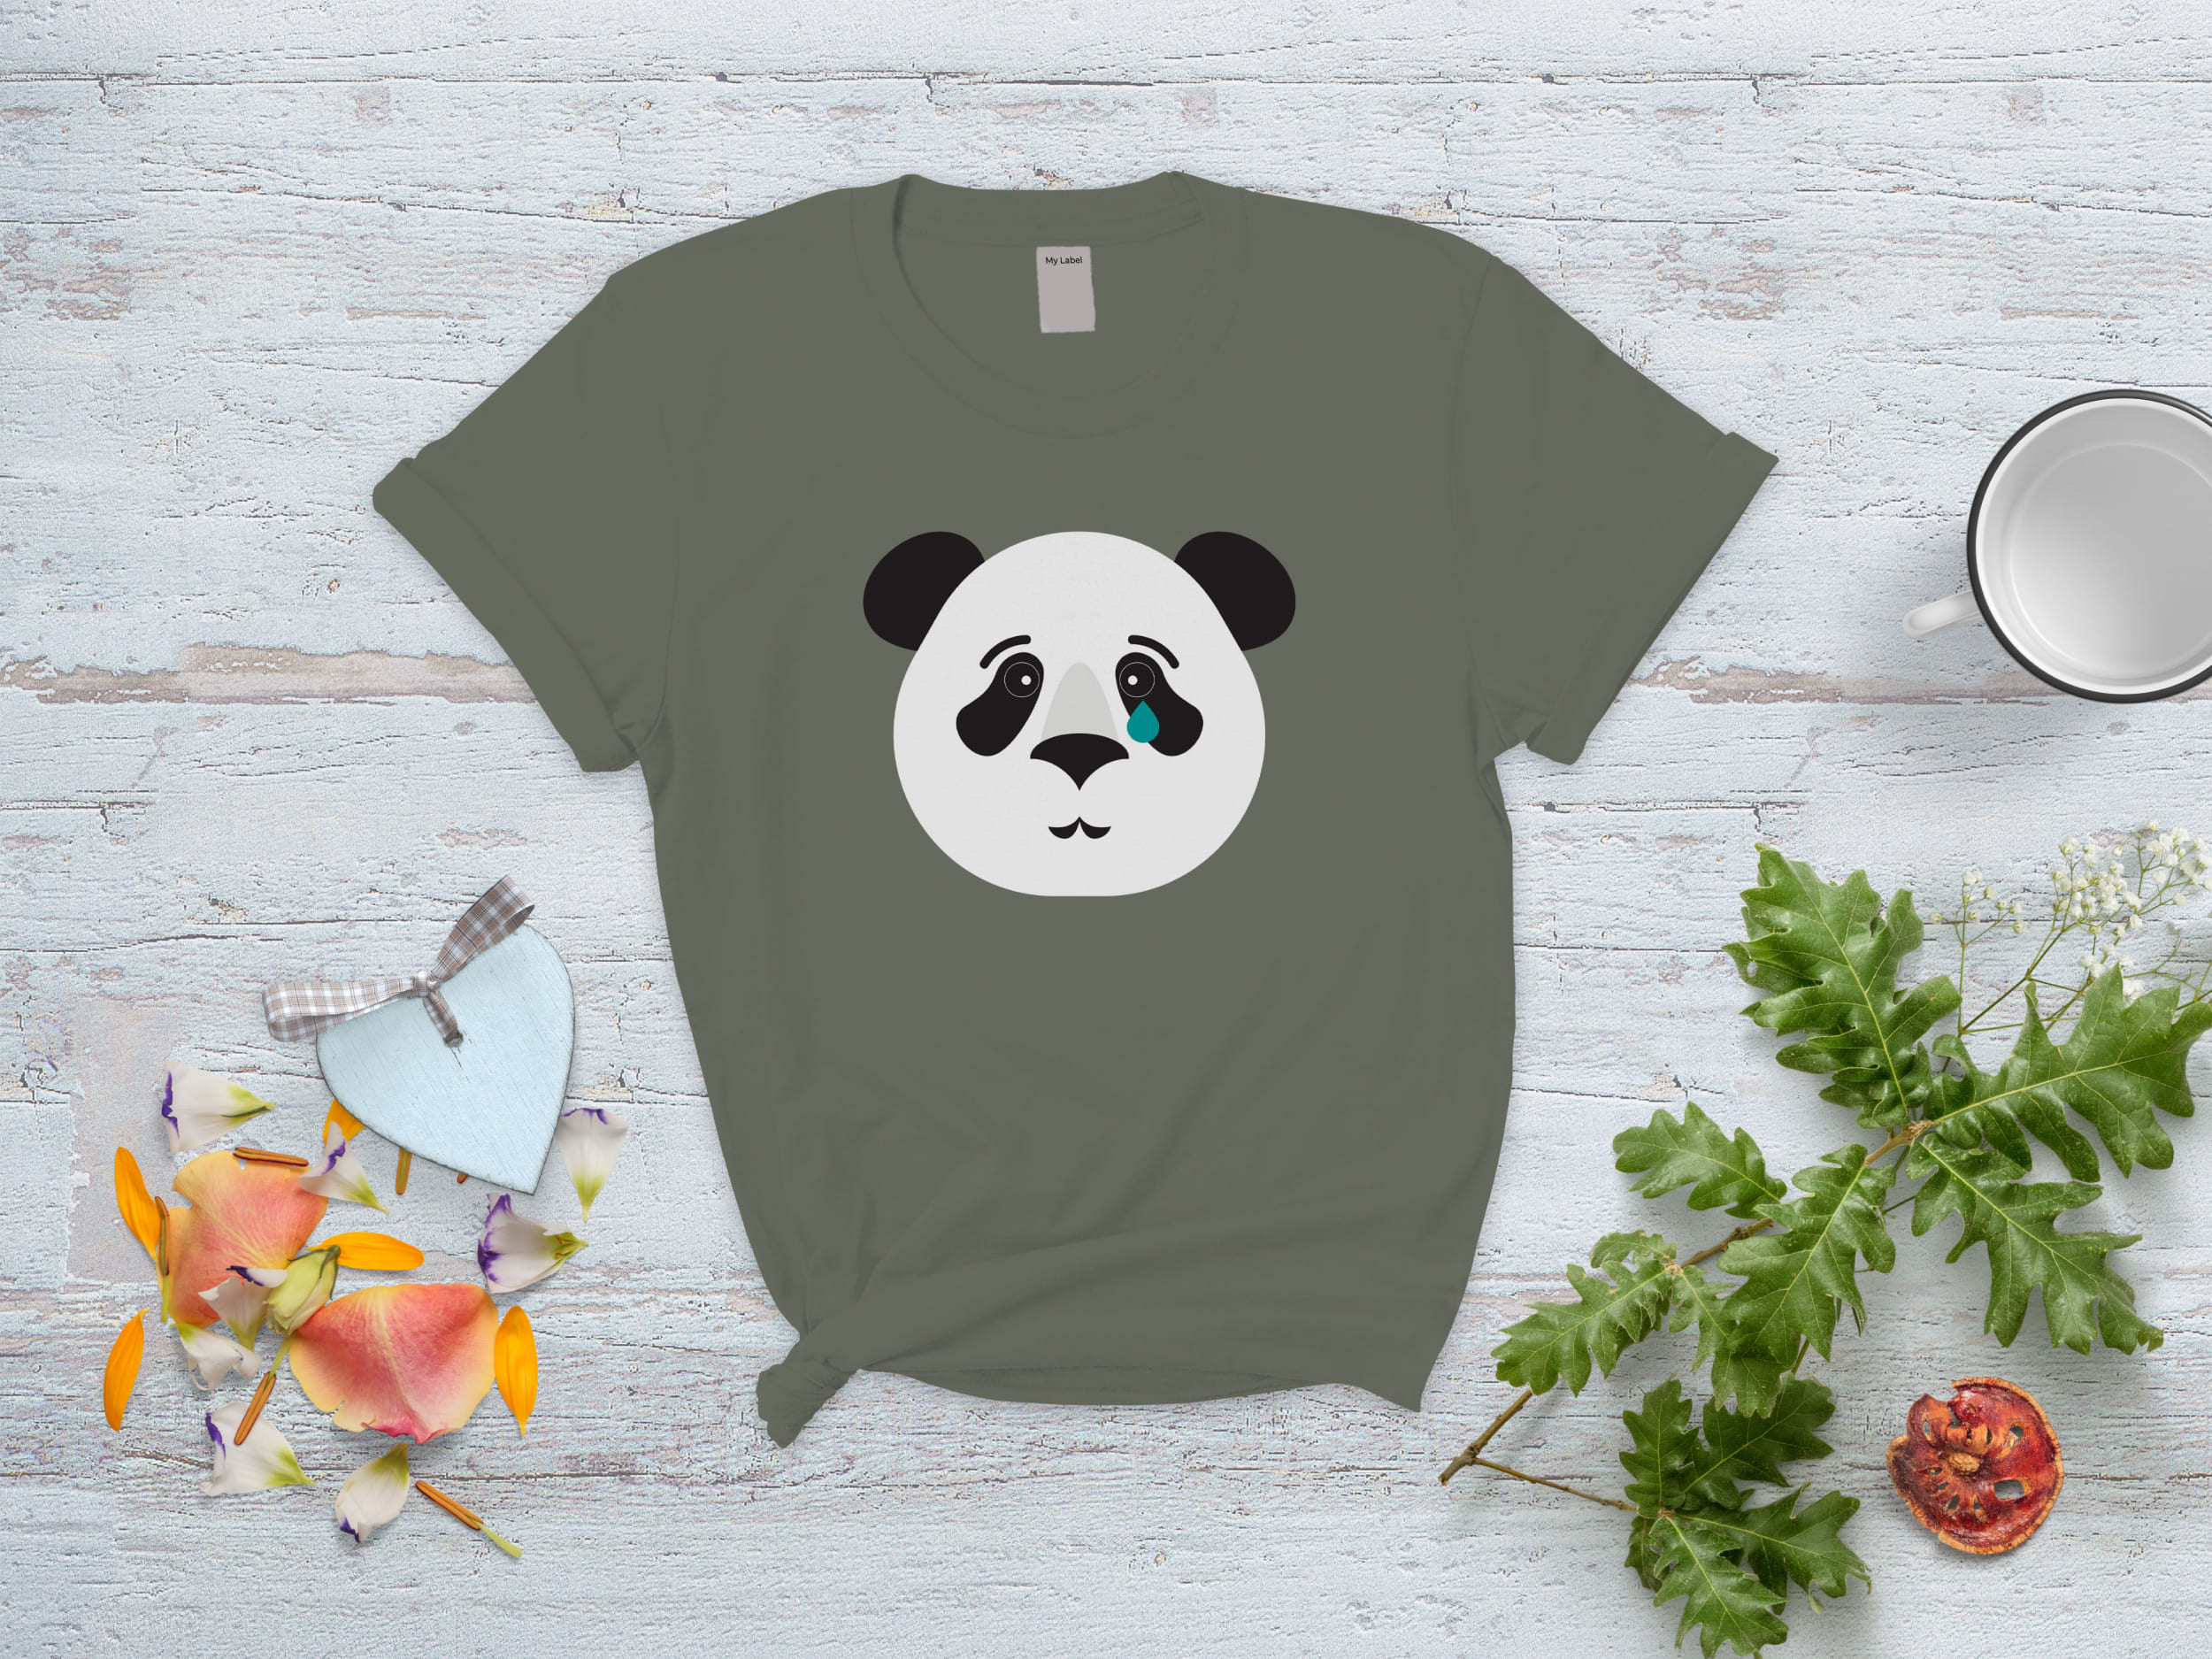 Gray t-shirt with a panda sad face on a gray and white background with various objects.